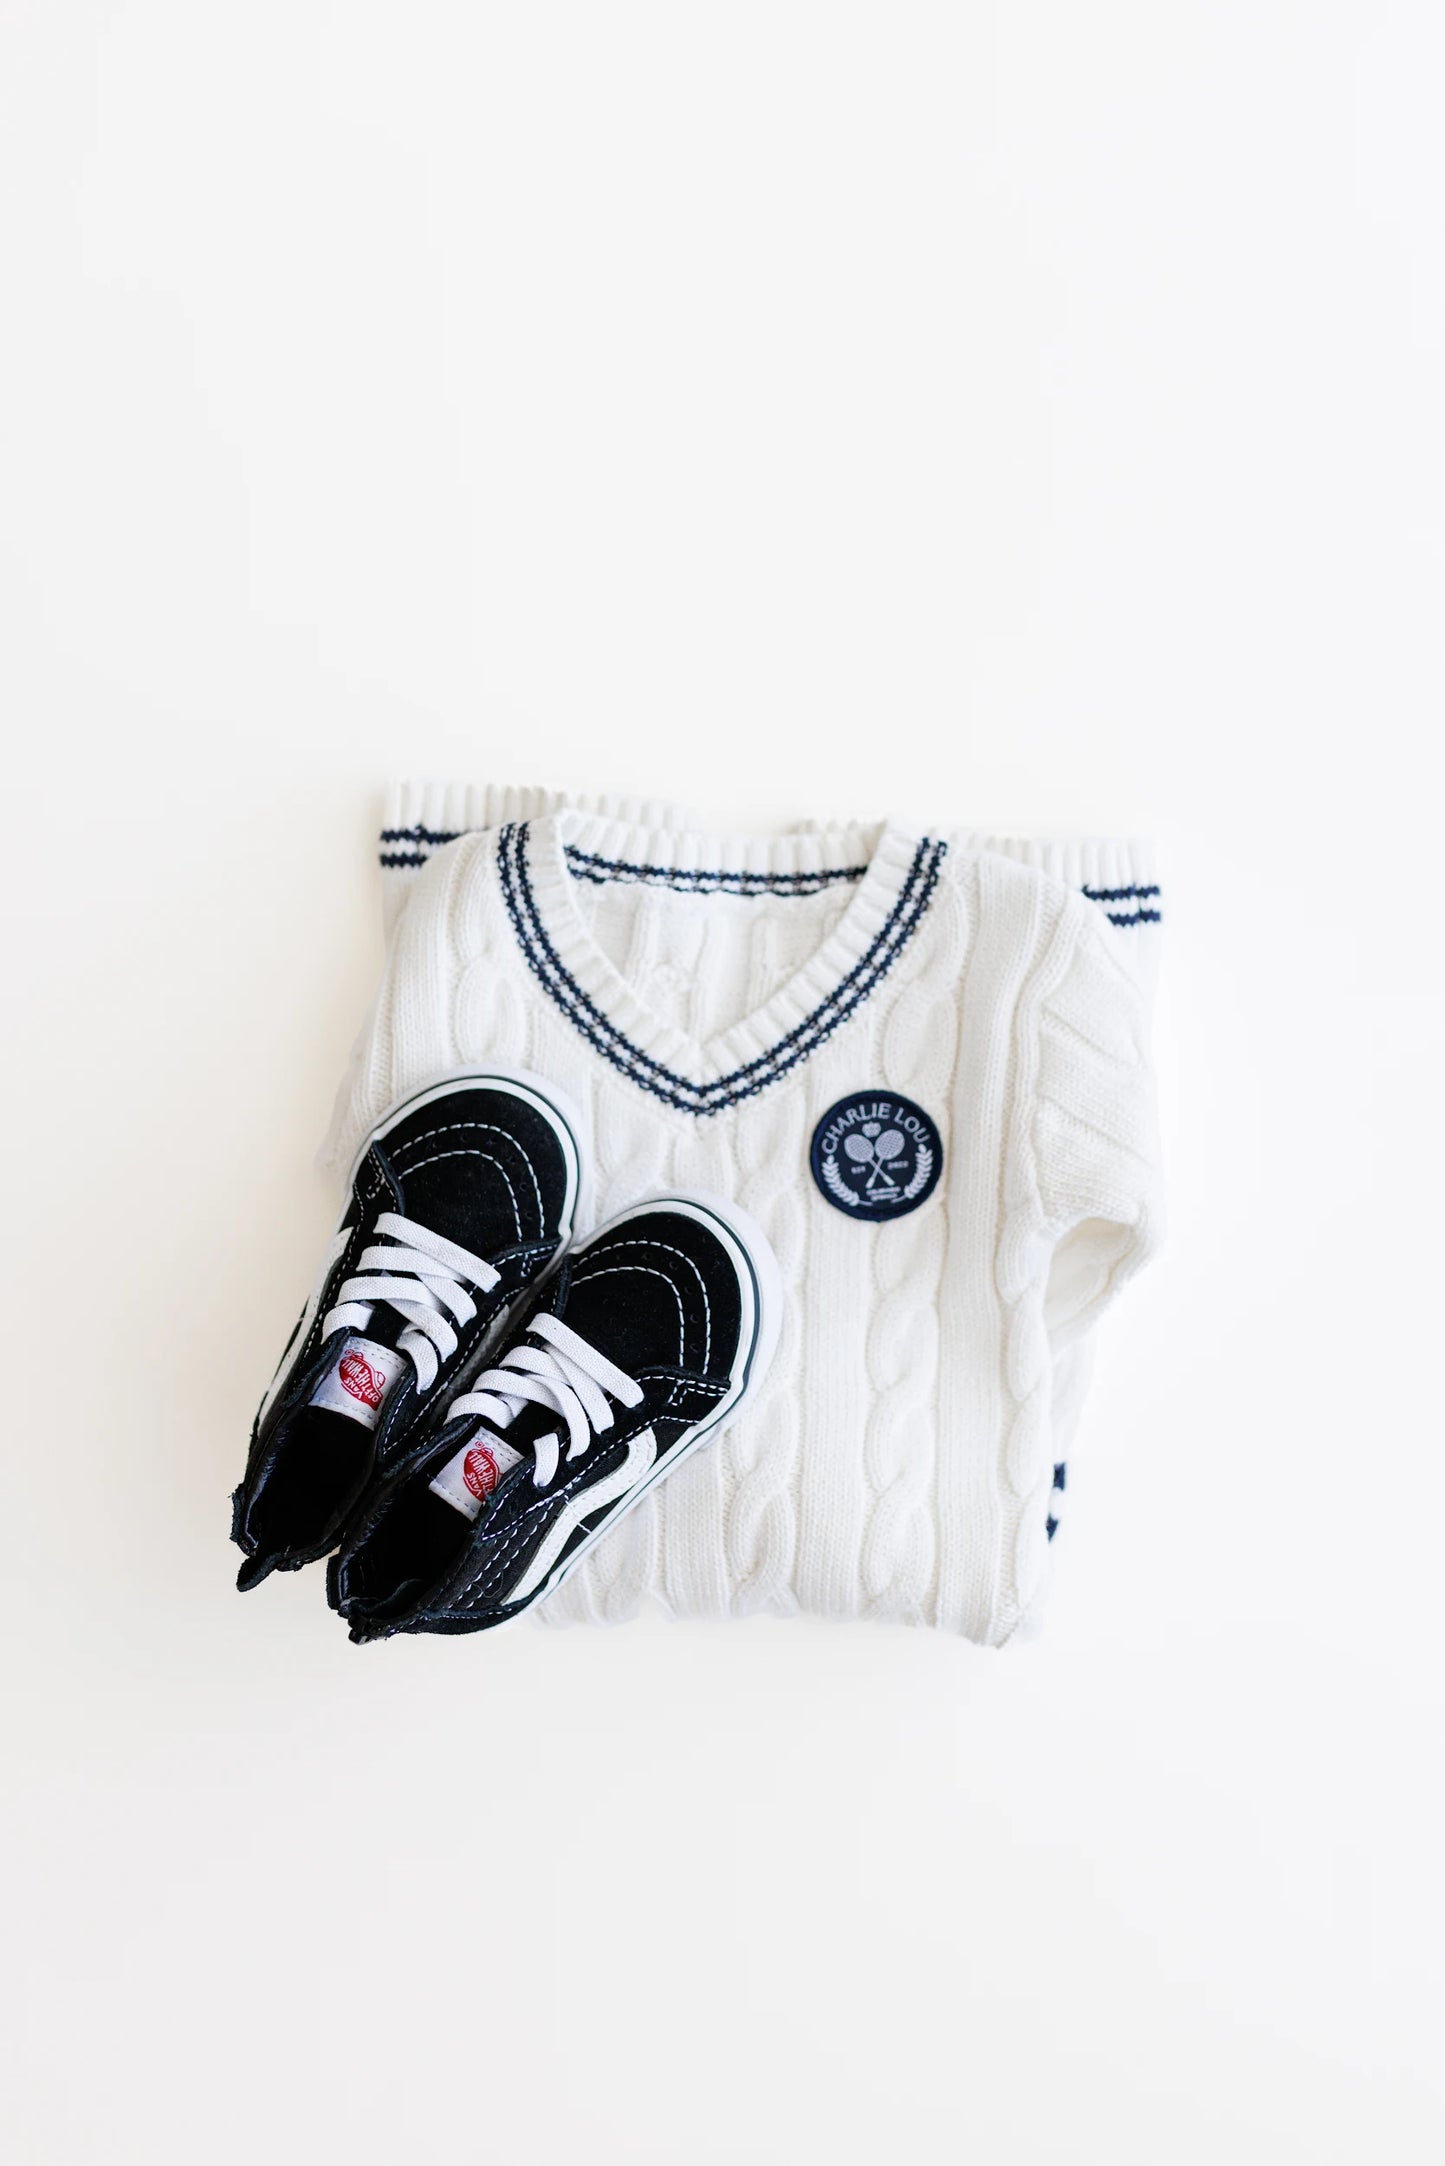 Gender neutral varsity sweater romper in cream and navy blue colors made from chain knit cotton for baby boys and baby girls as well as toddlers.